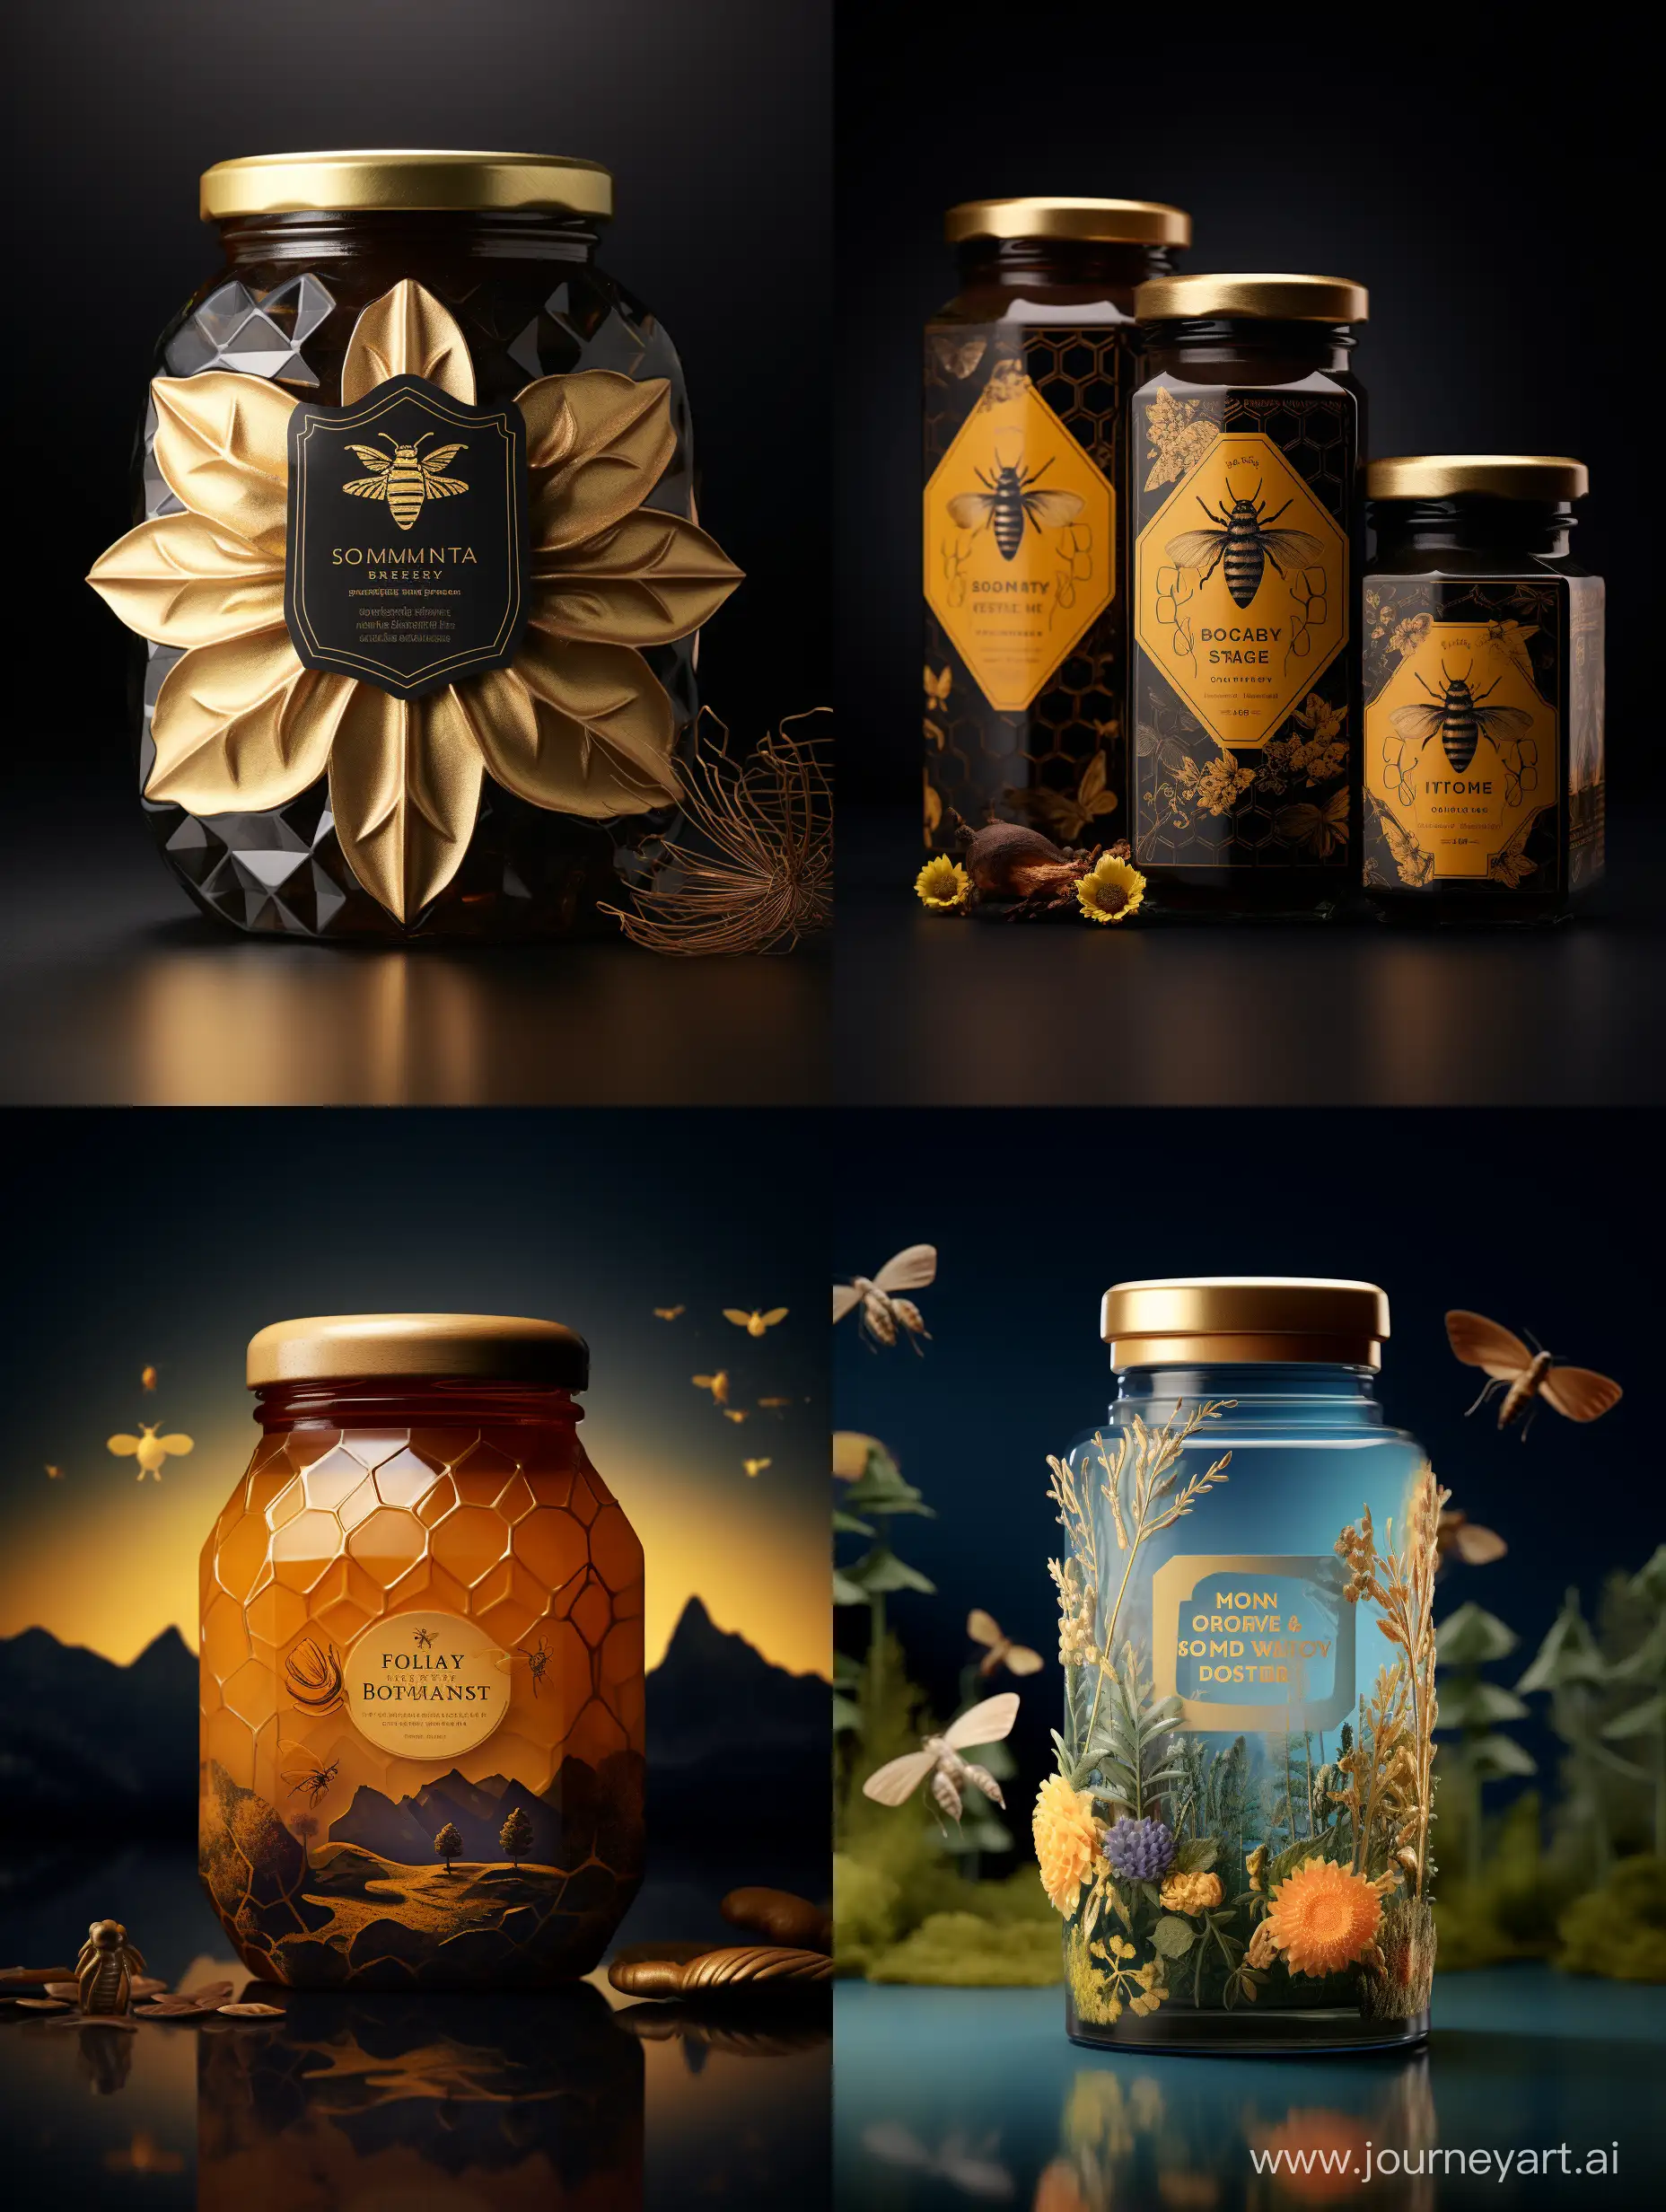 Give me the most creative packaging of honey